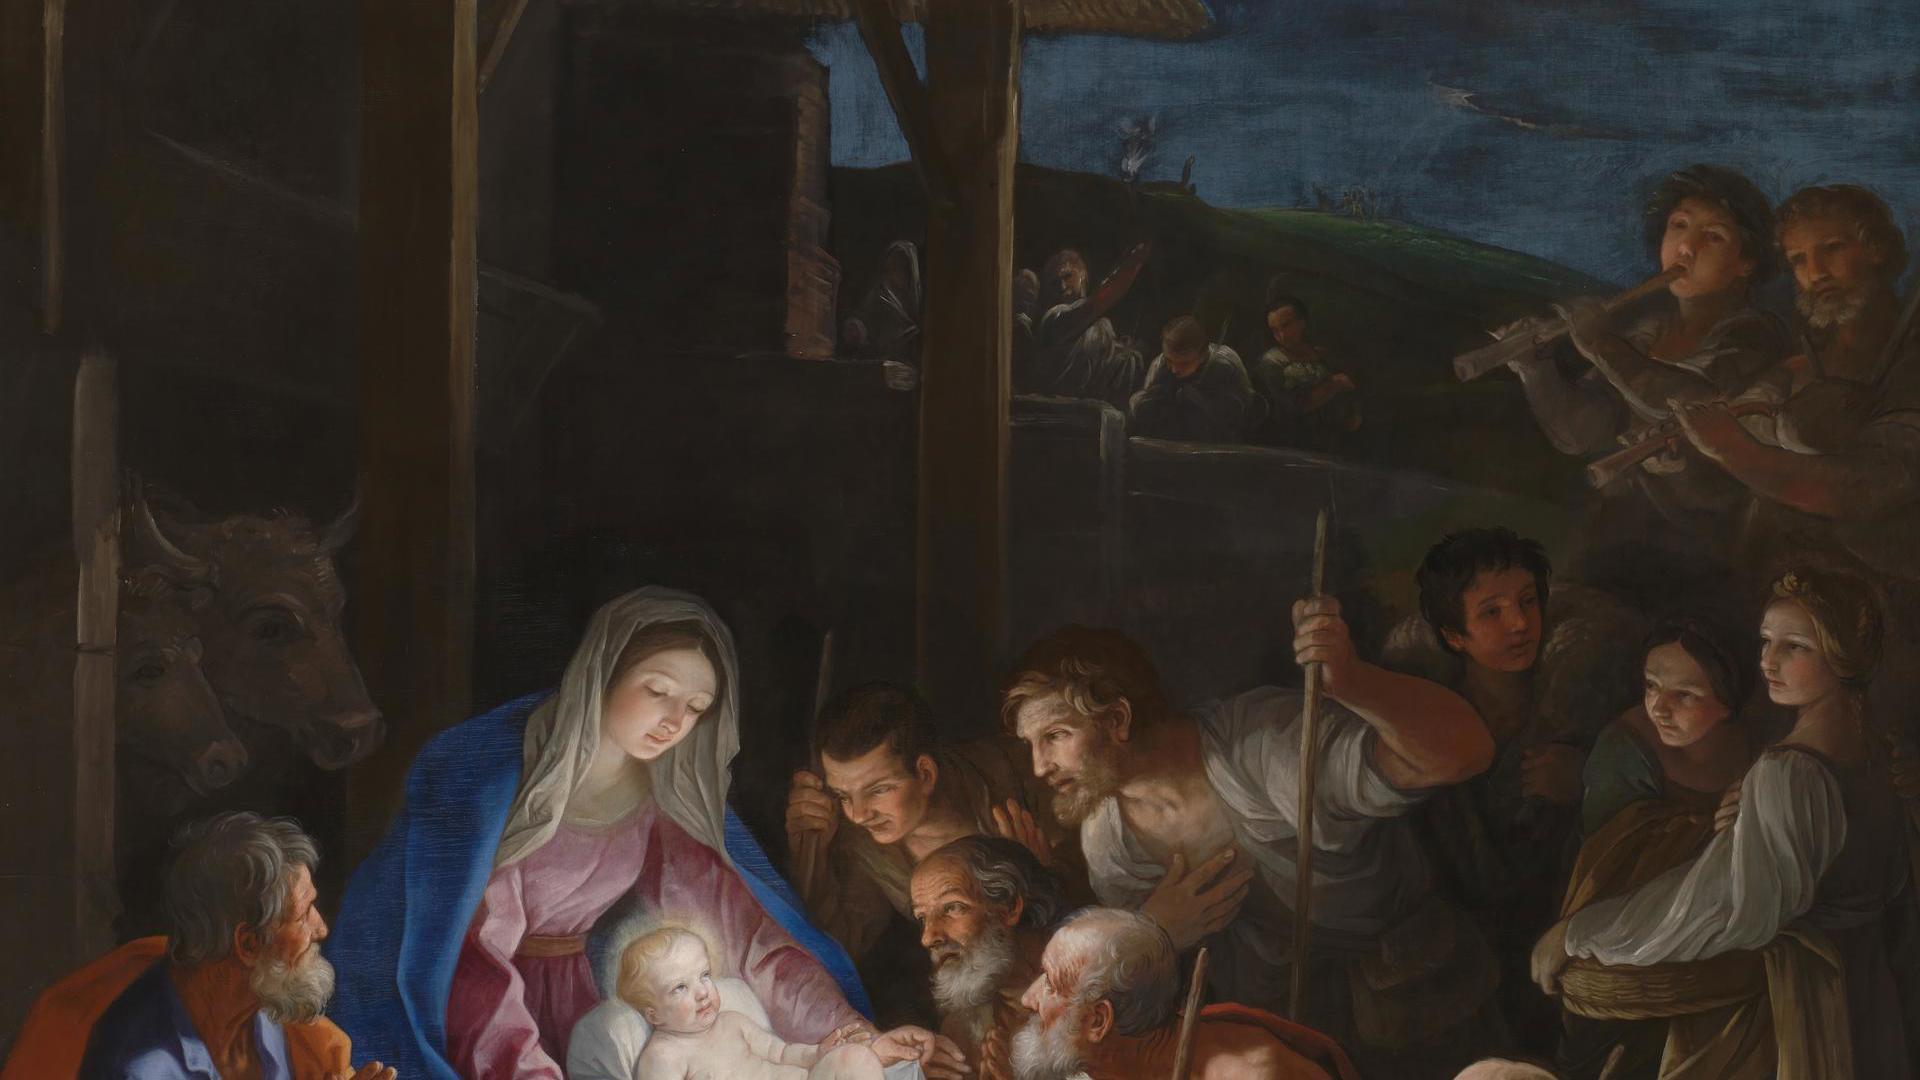 The Adoration of the Shepherds by Guido Reni